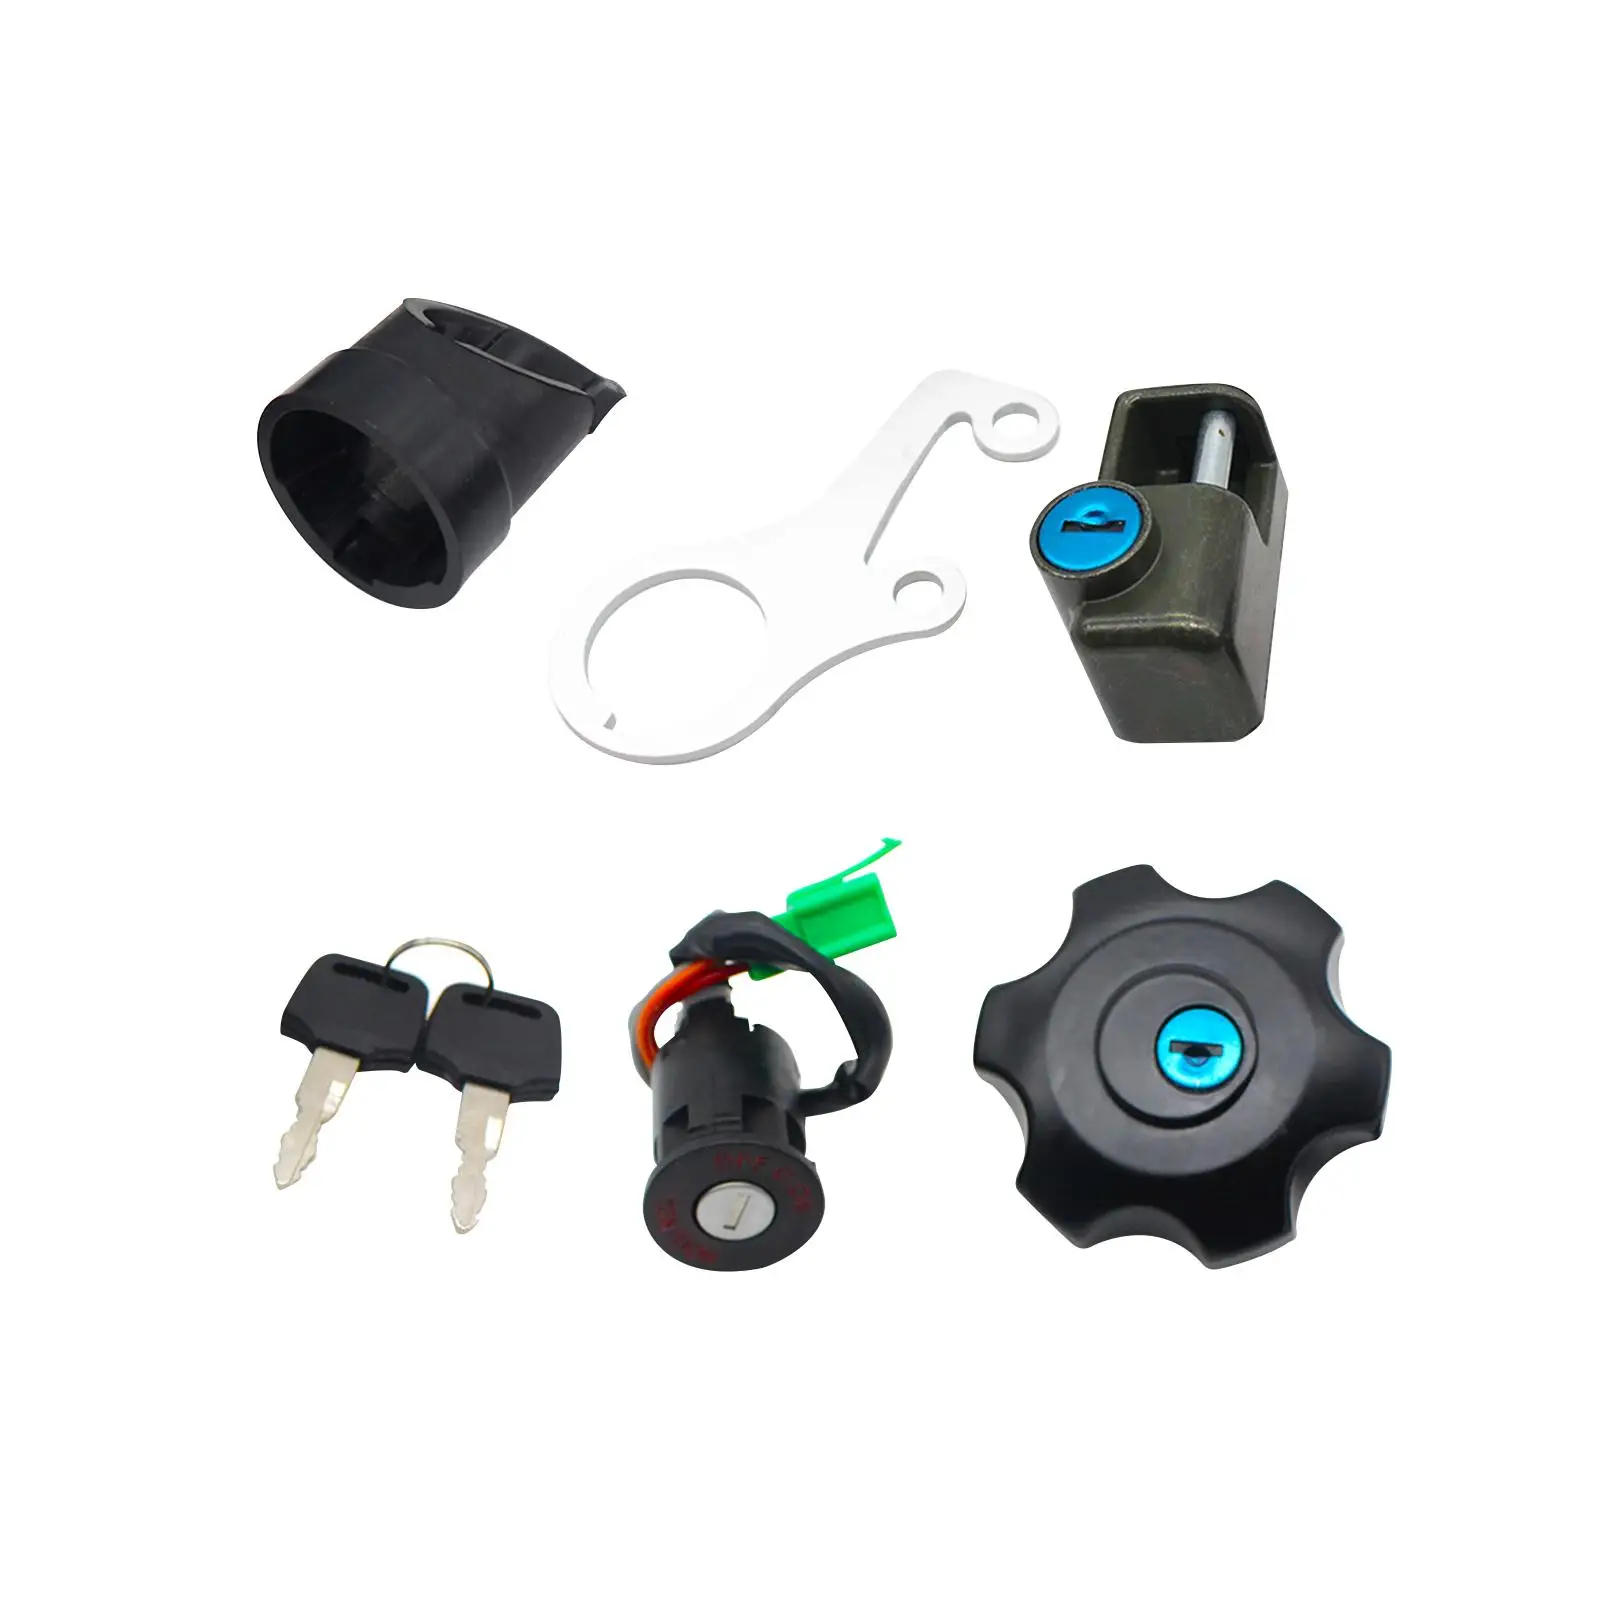 Motorcycle Ignition Switch Fuel Gas Cap Seat Lock Key Kit 37110-29fa0